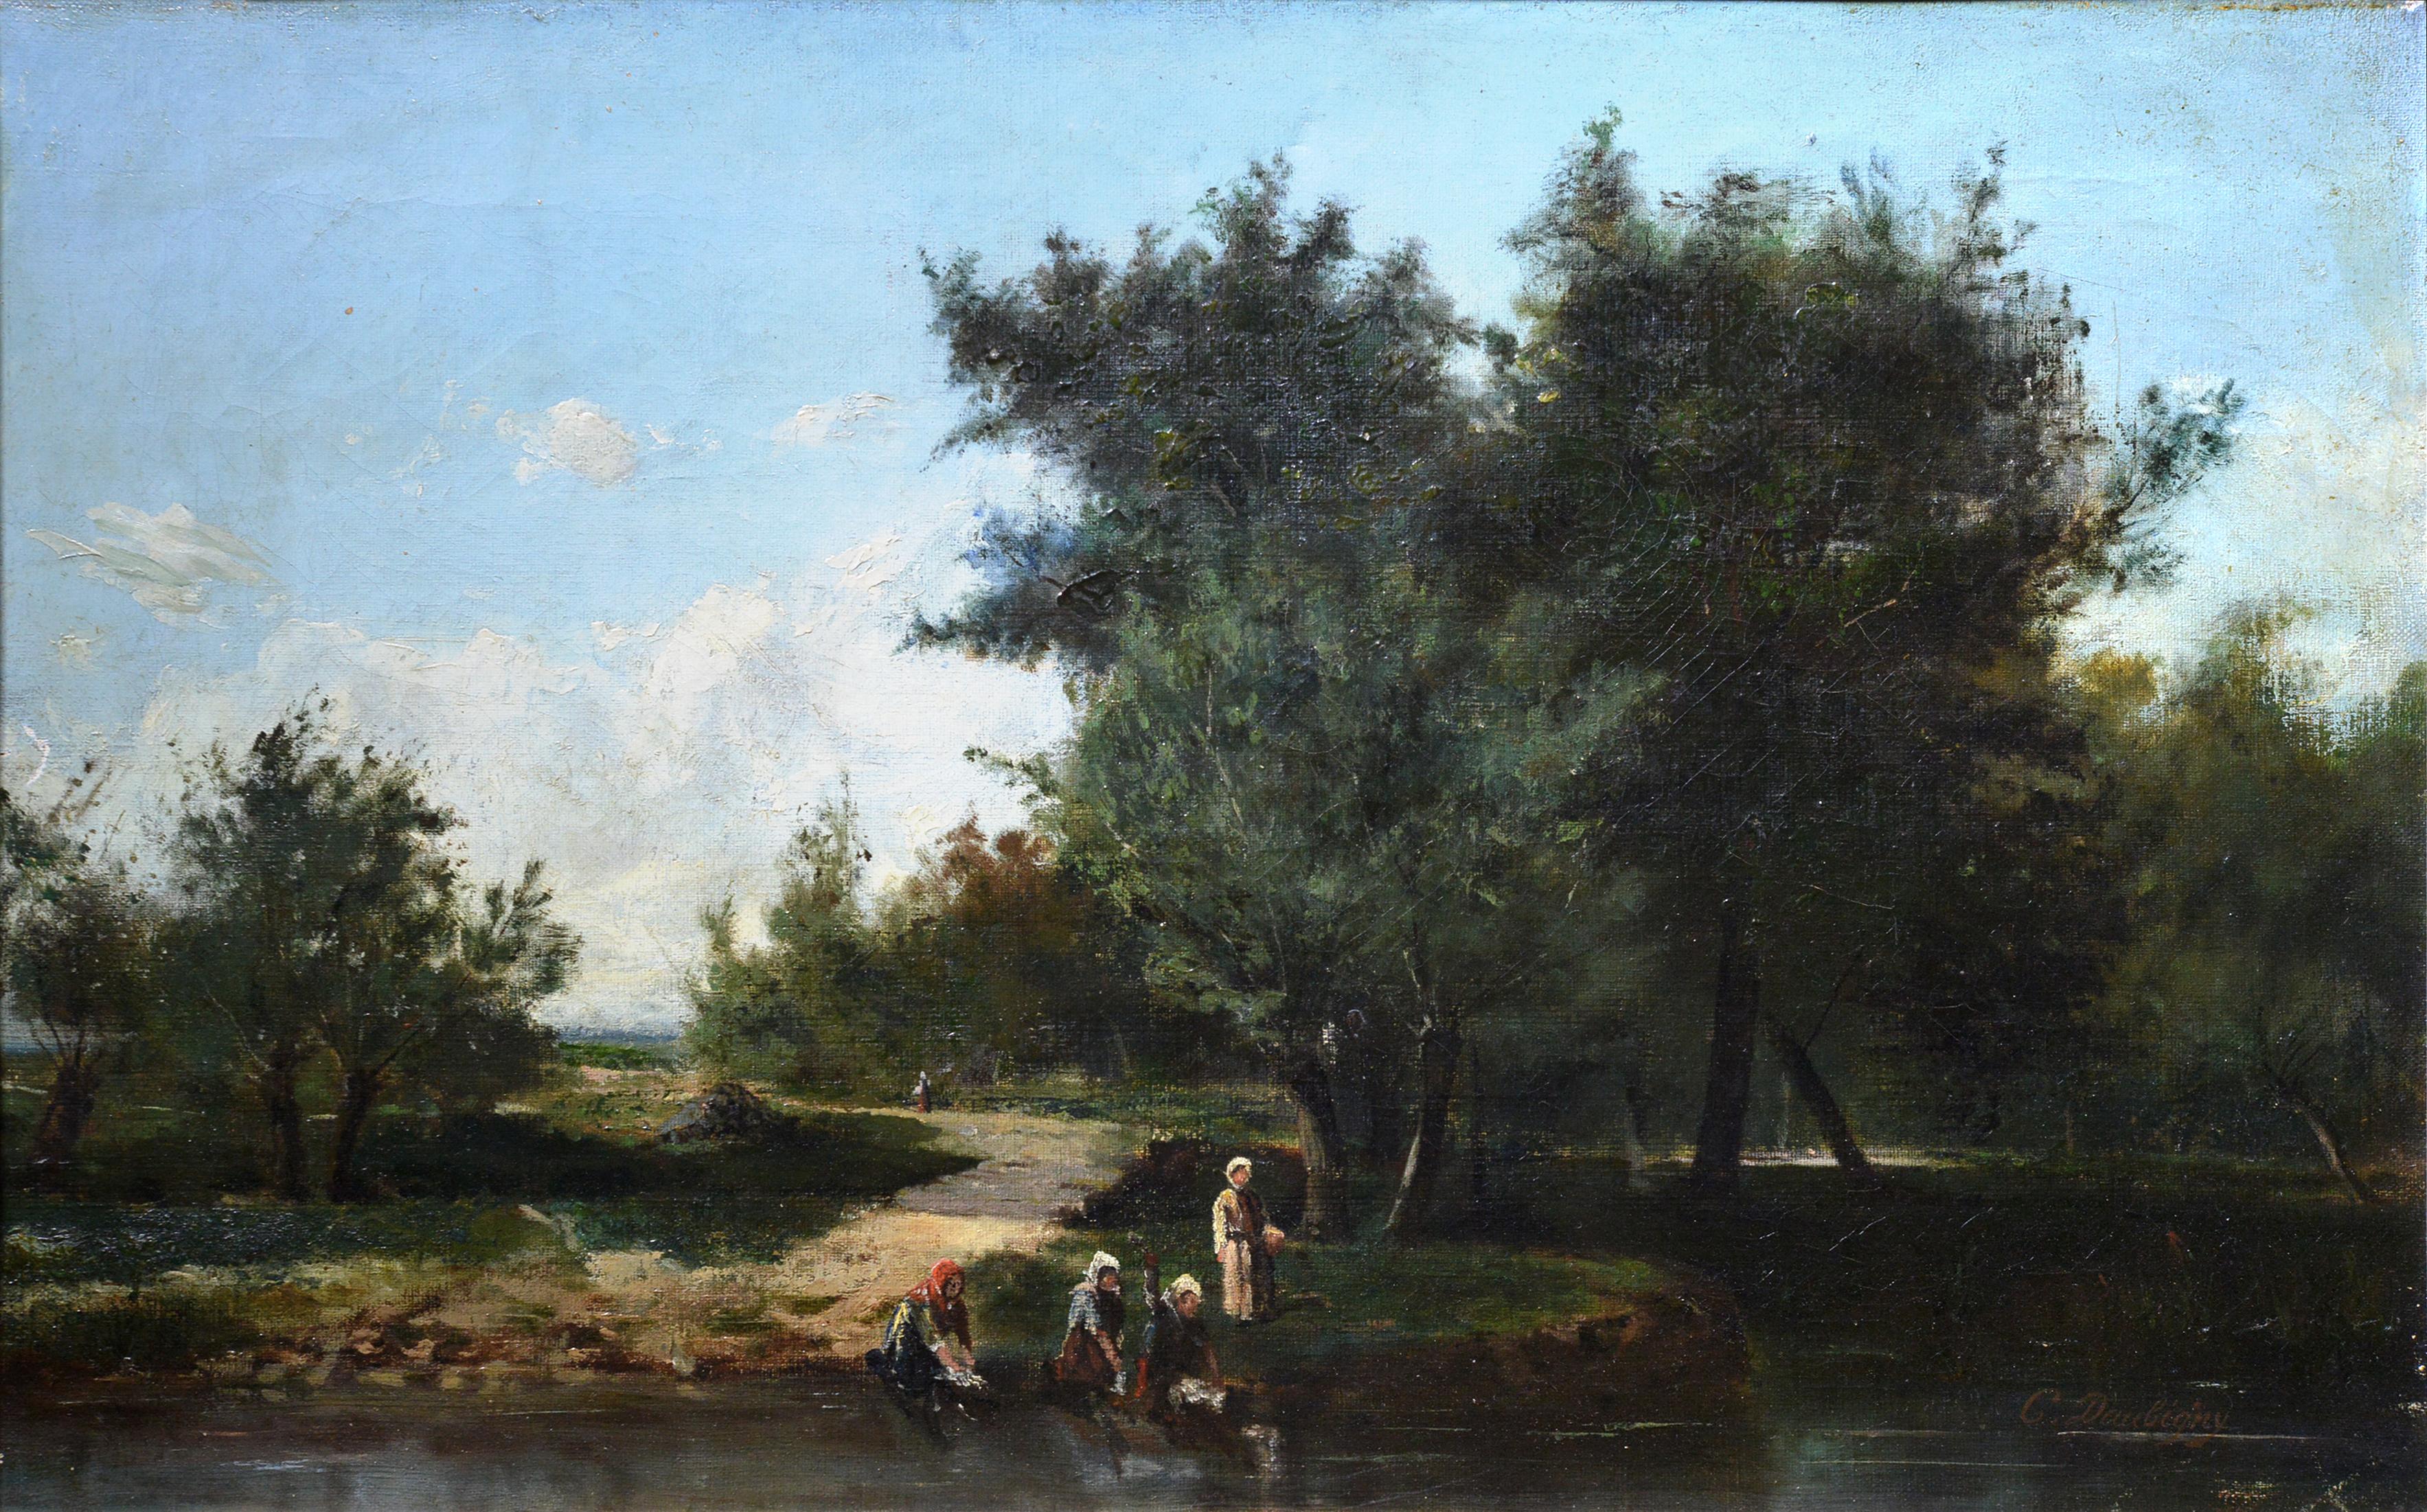 Laundresses on River 19th century Barbizonian Landscape by French Master - Painting by Unknown